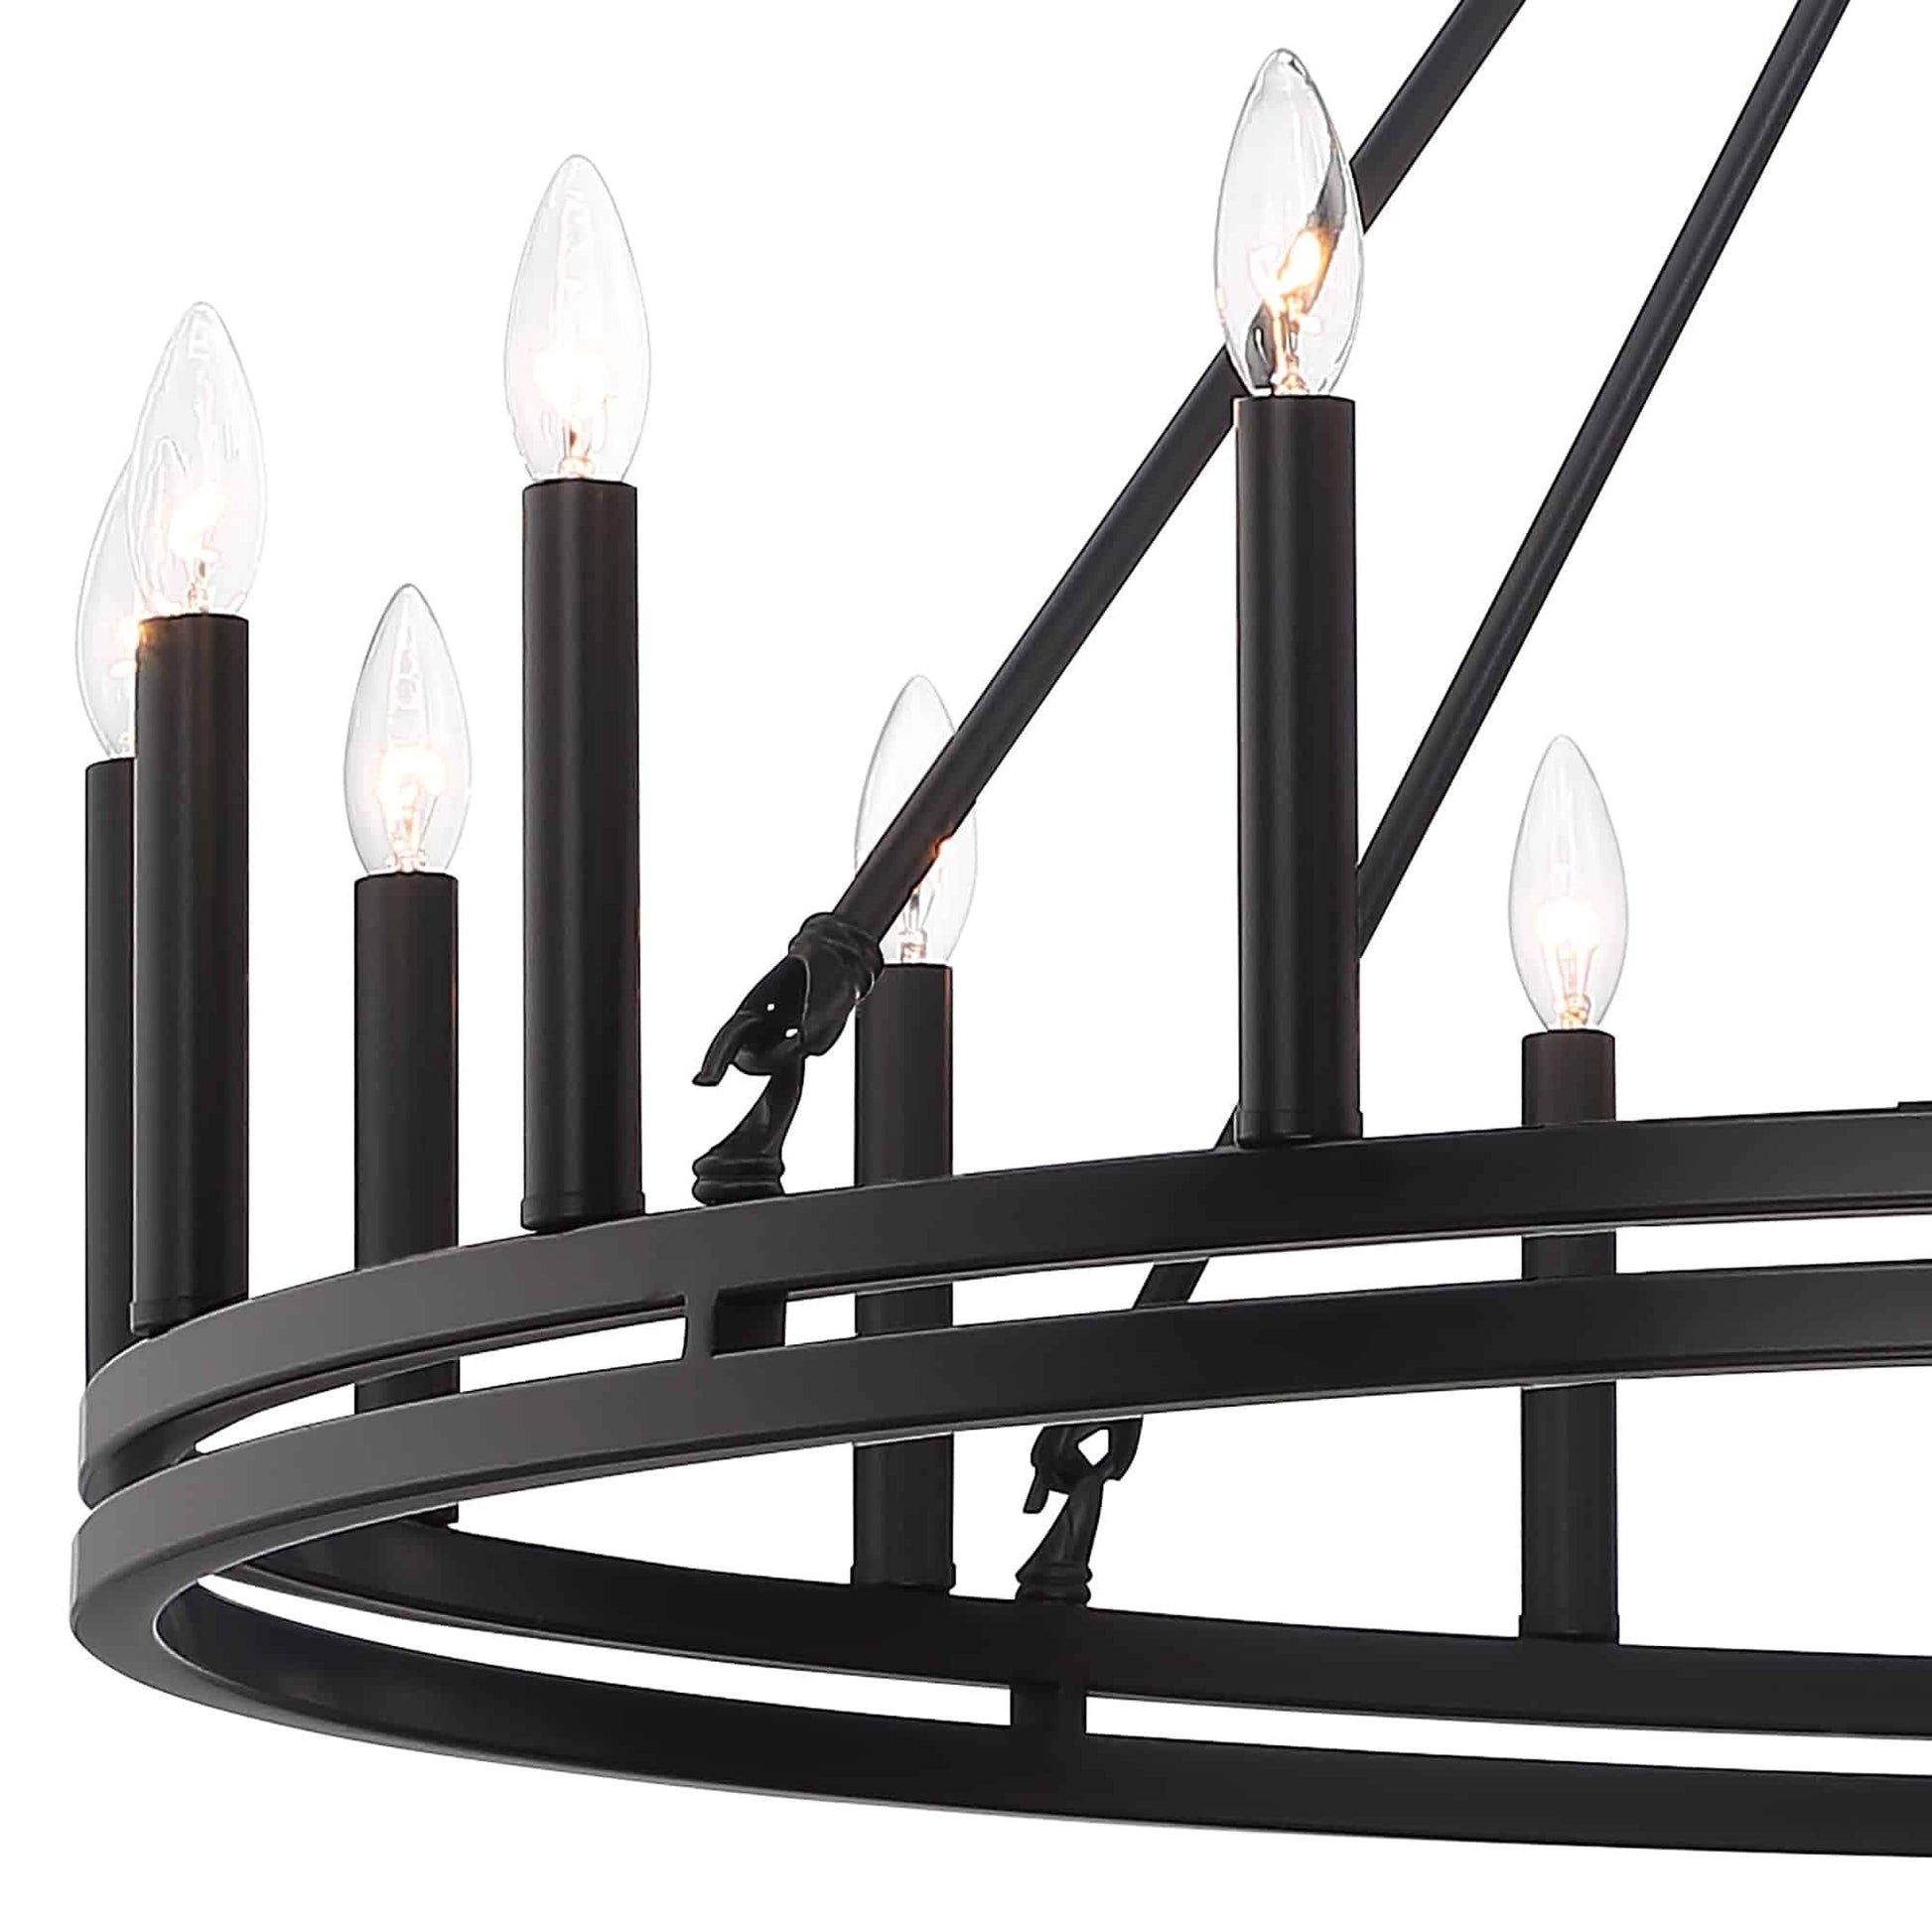 18 light candle style wagon wheel chandelier (16) by ACROMA